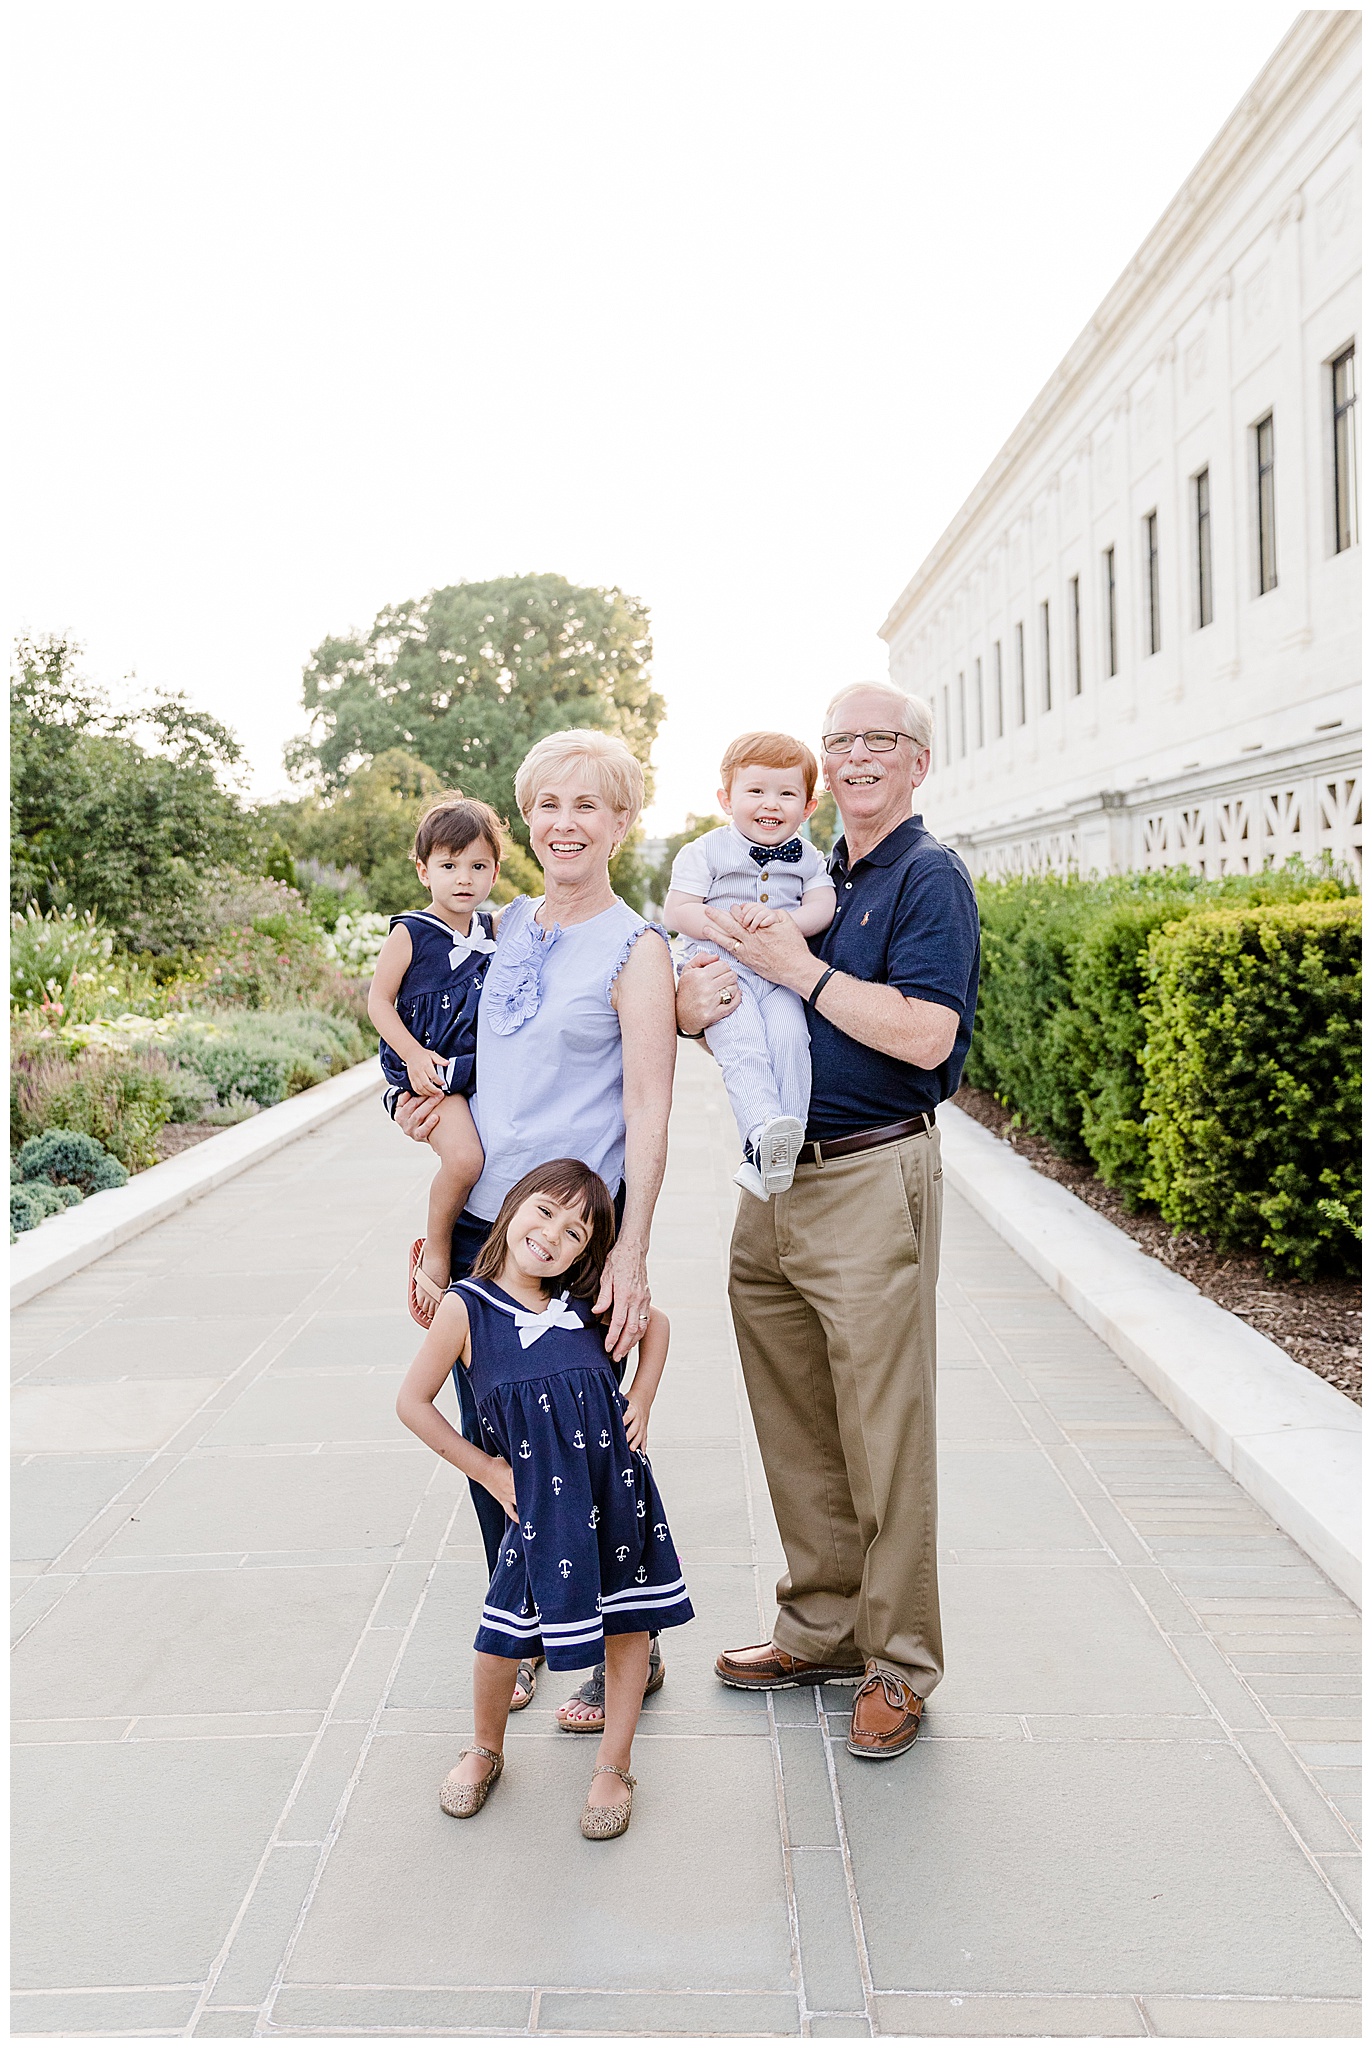 Grandparents Photo Session in Washington, DC with Kofmehl Photography